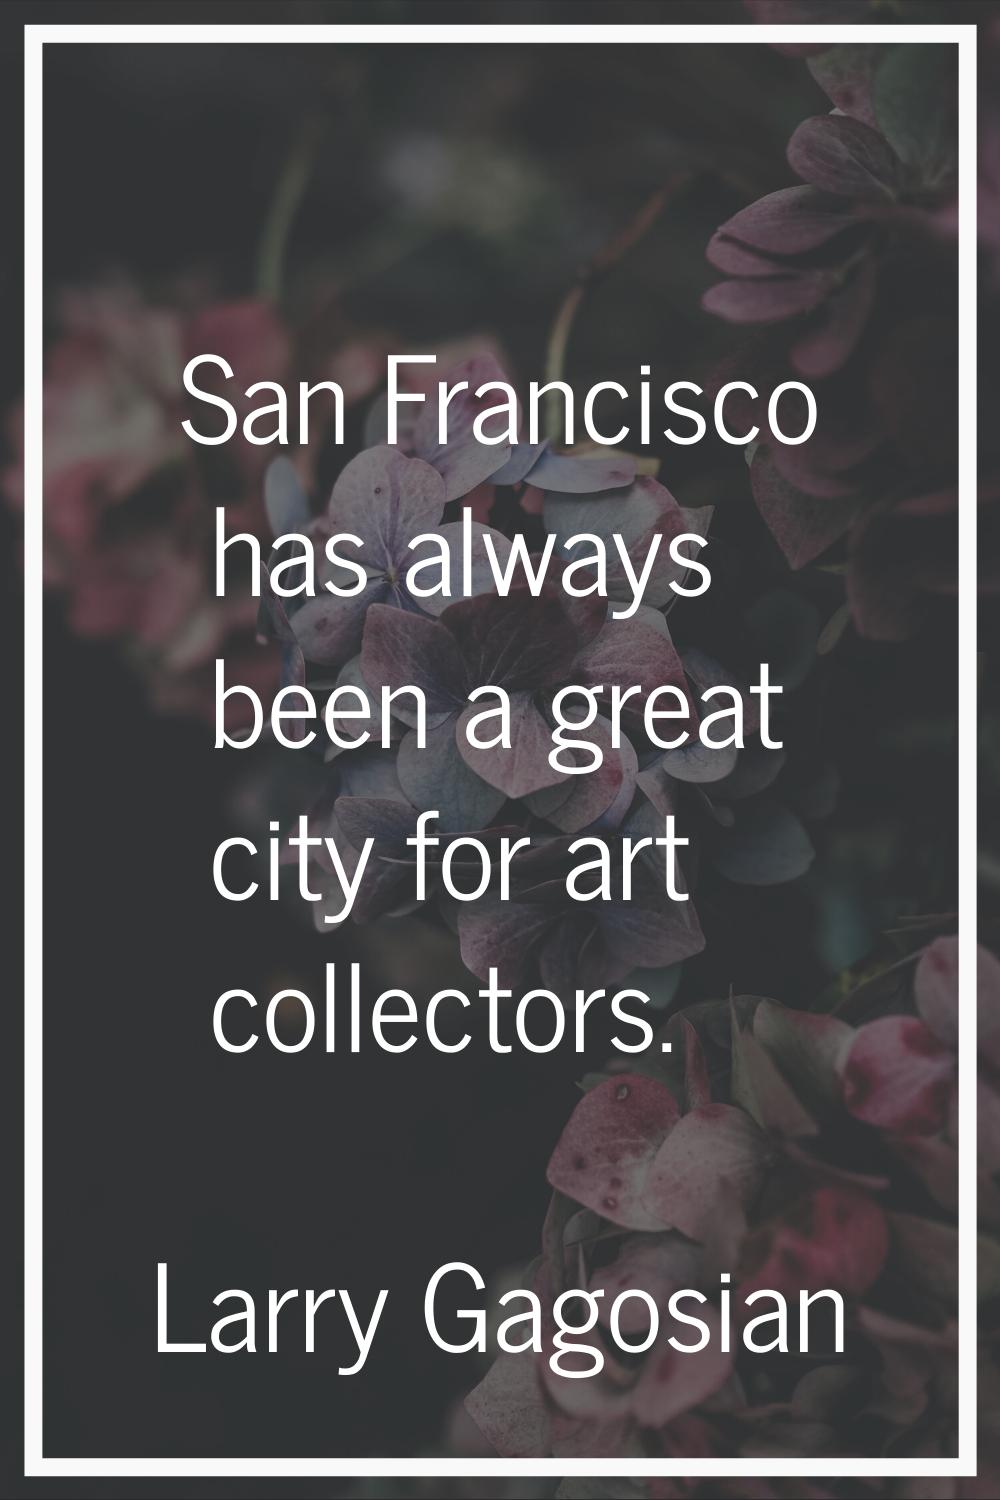 San Francisco has always been a great city for art collectors.